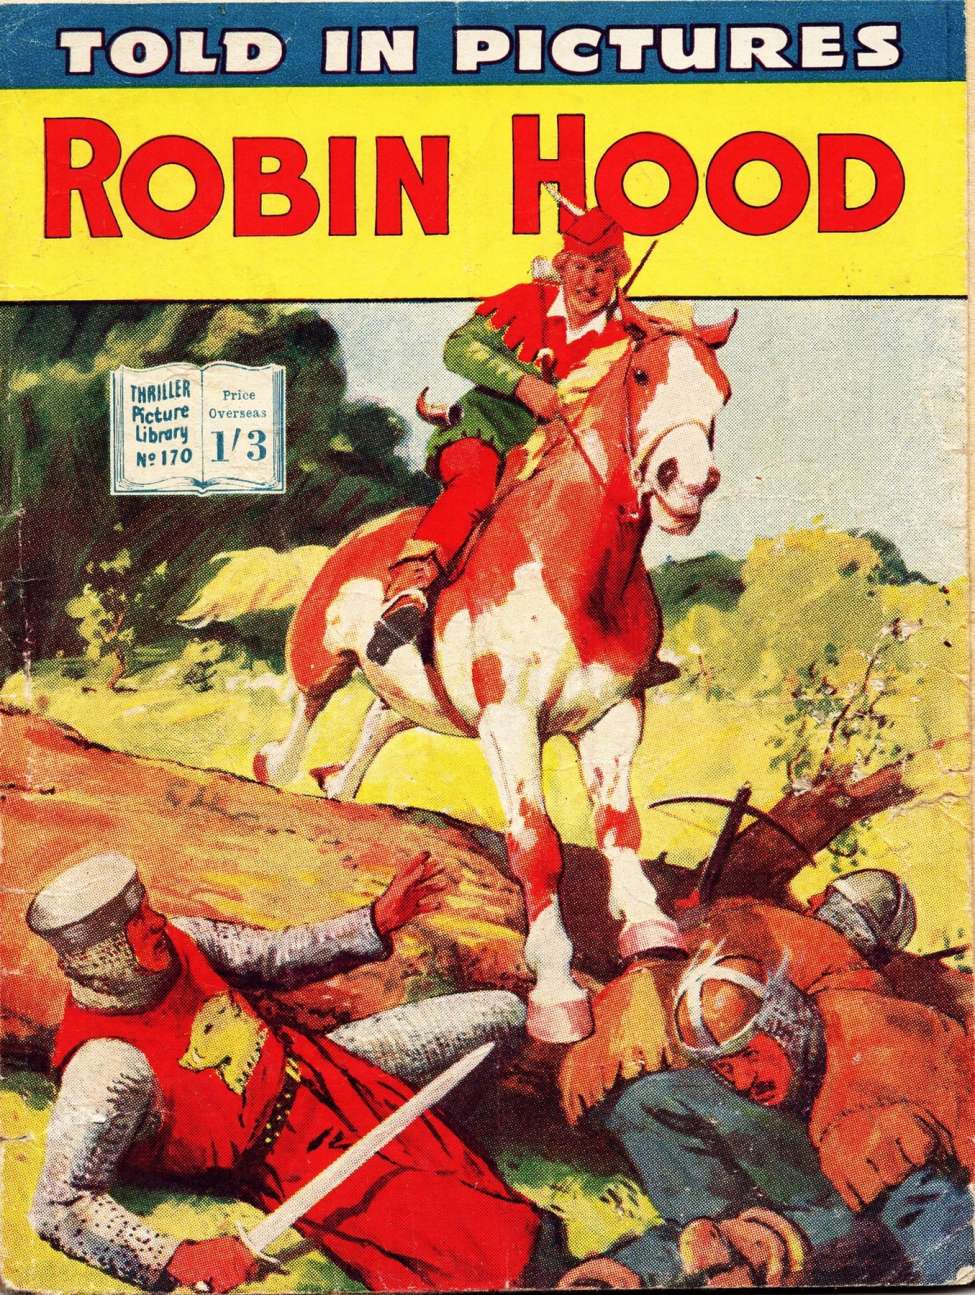 Book Cover For Thriller Picture Library 170 - Robin Hood